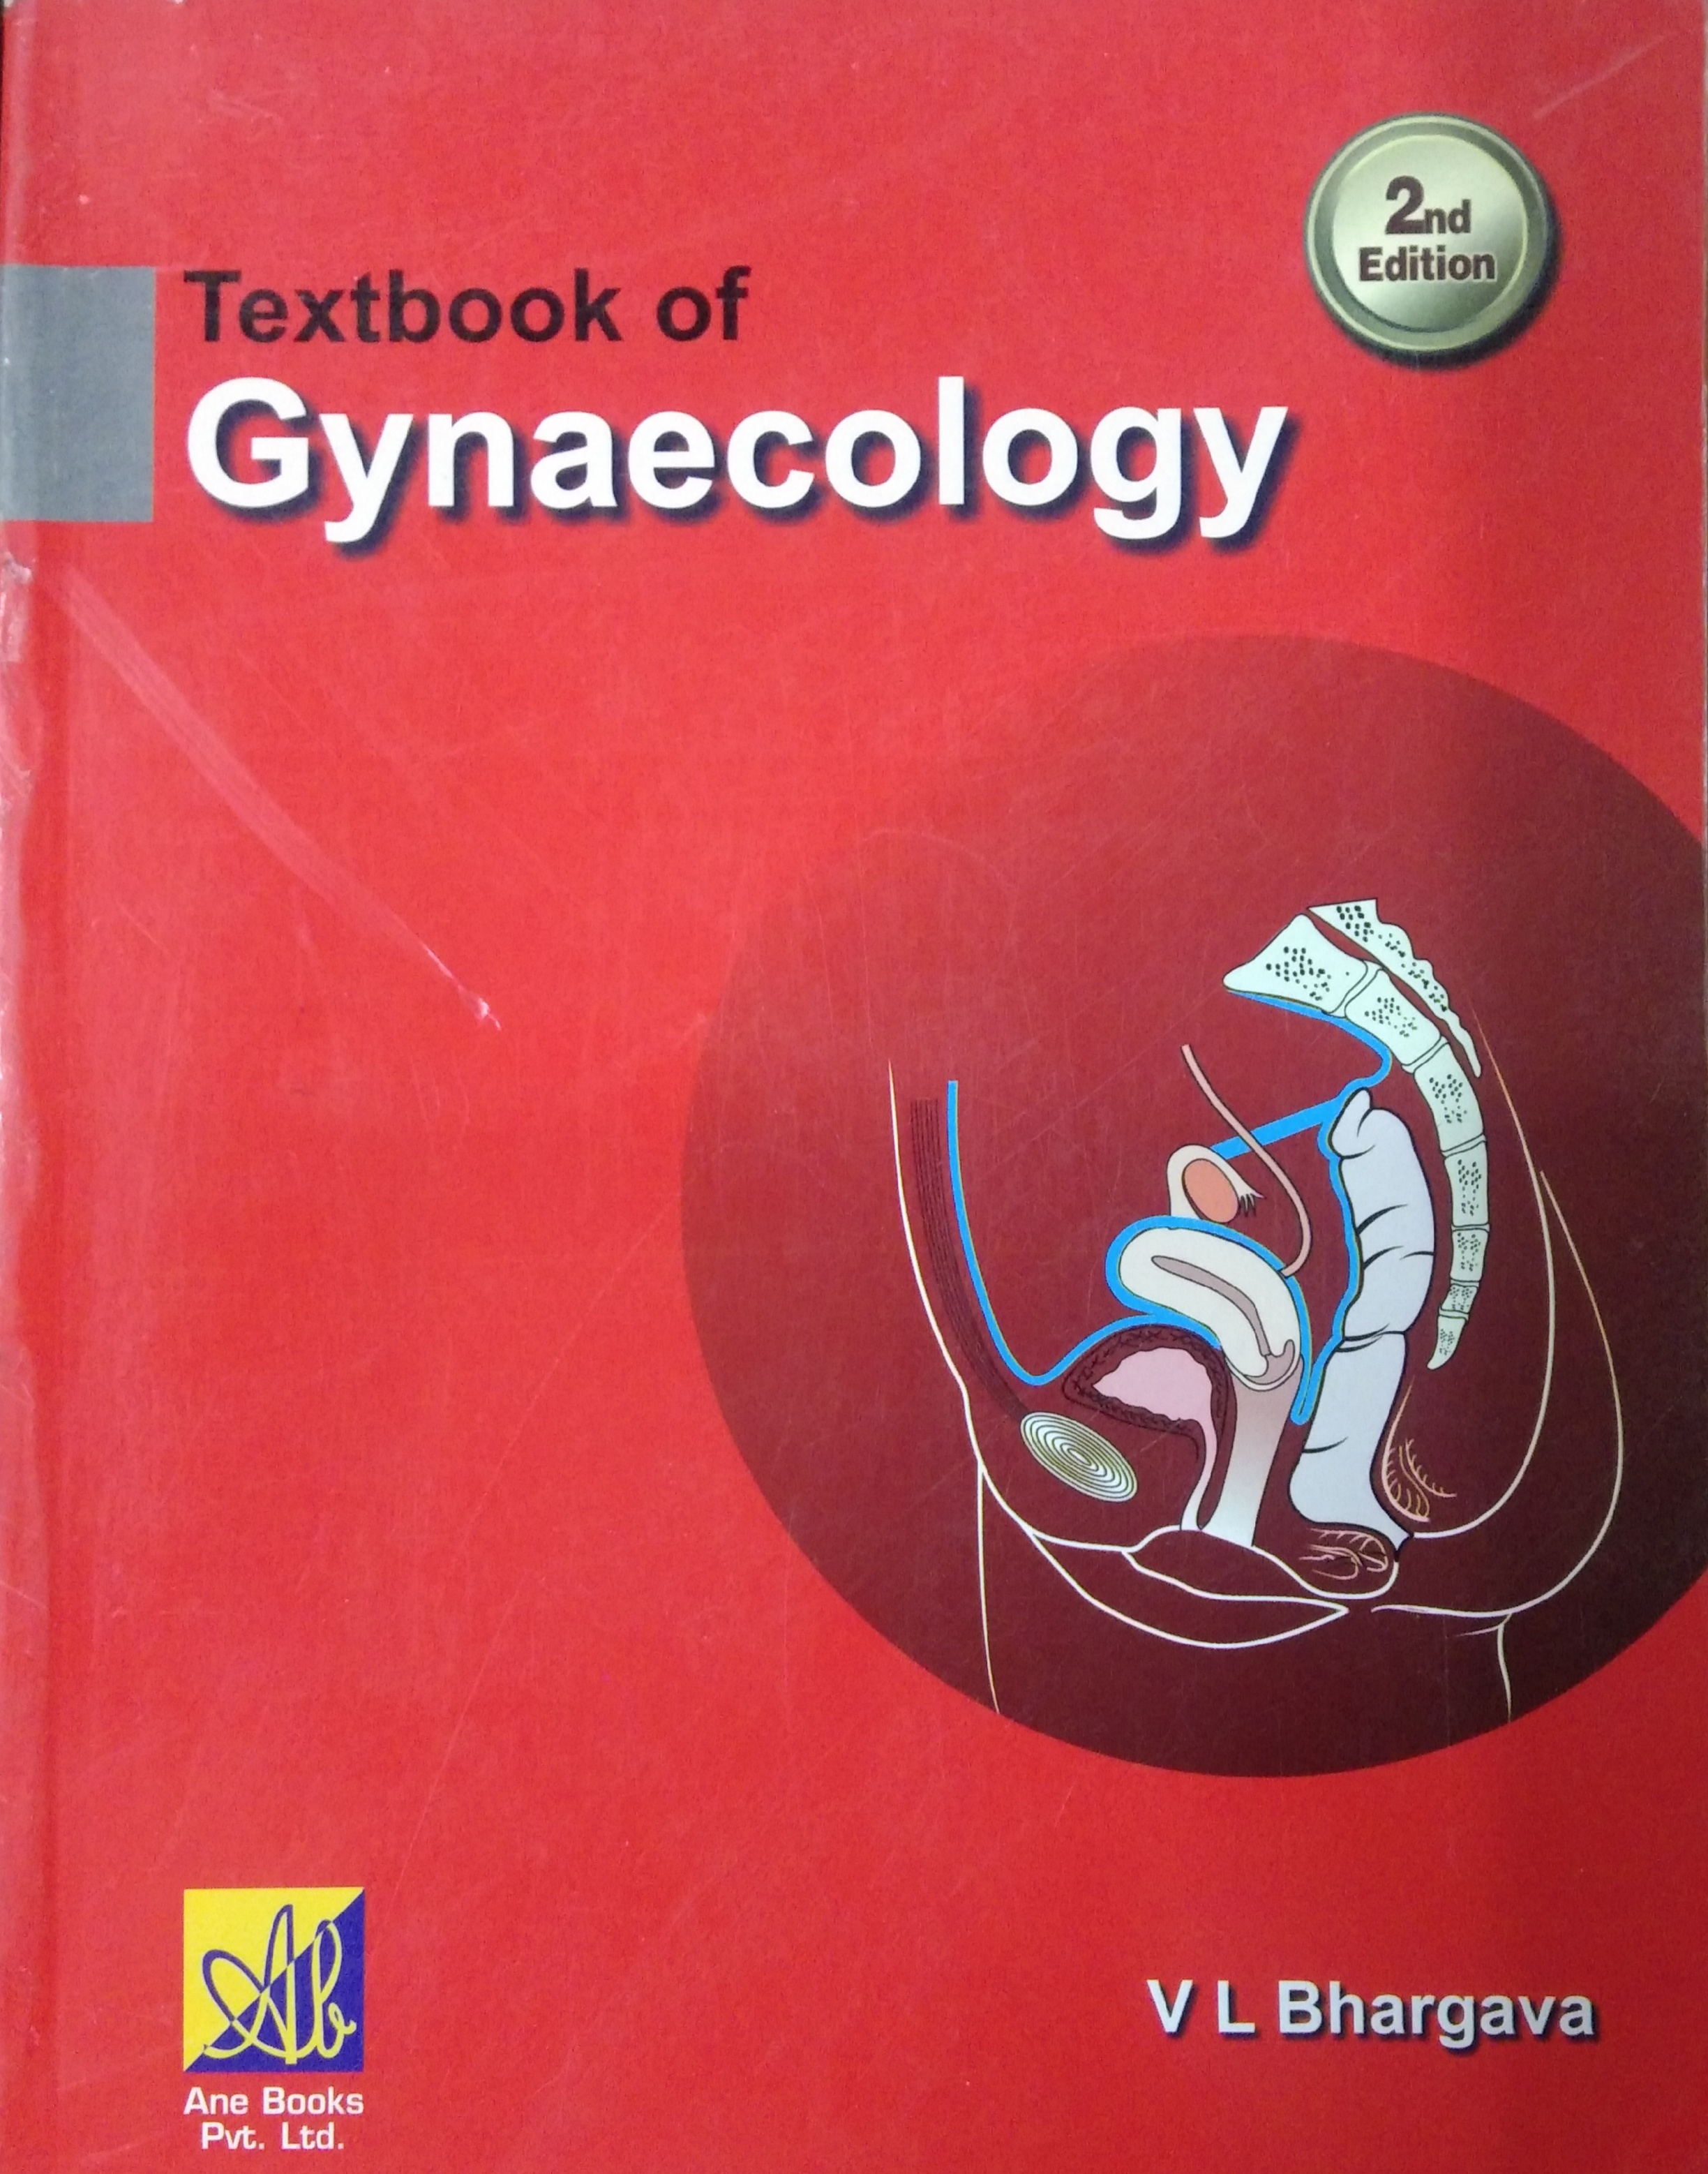 

exclusive-publishers/other/textbook-of-gynaecology-2ed--9788180522864